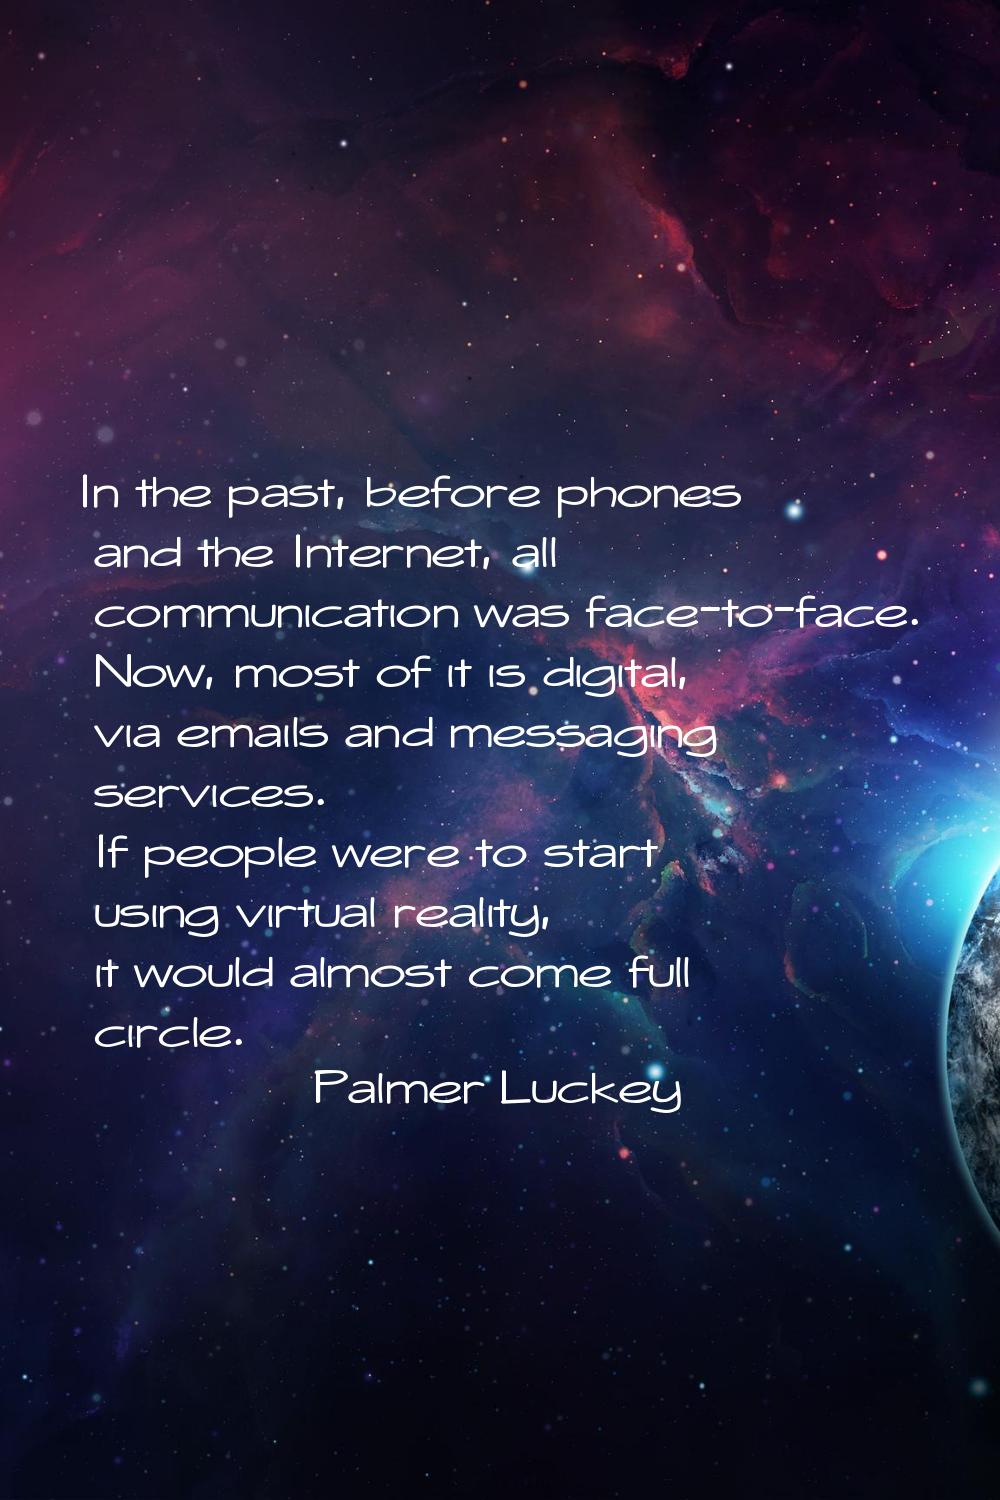 In the past, before phones and the Internet, all communication was face-to-face. Now, most of it is